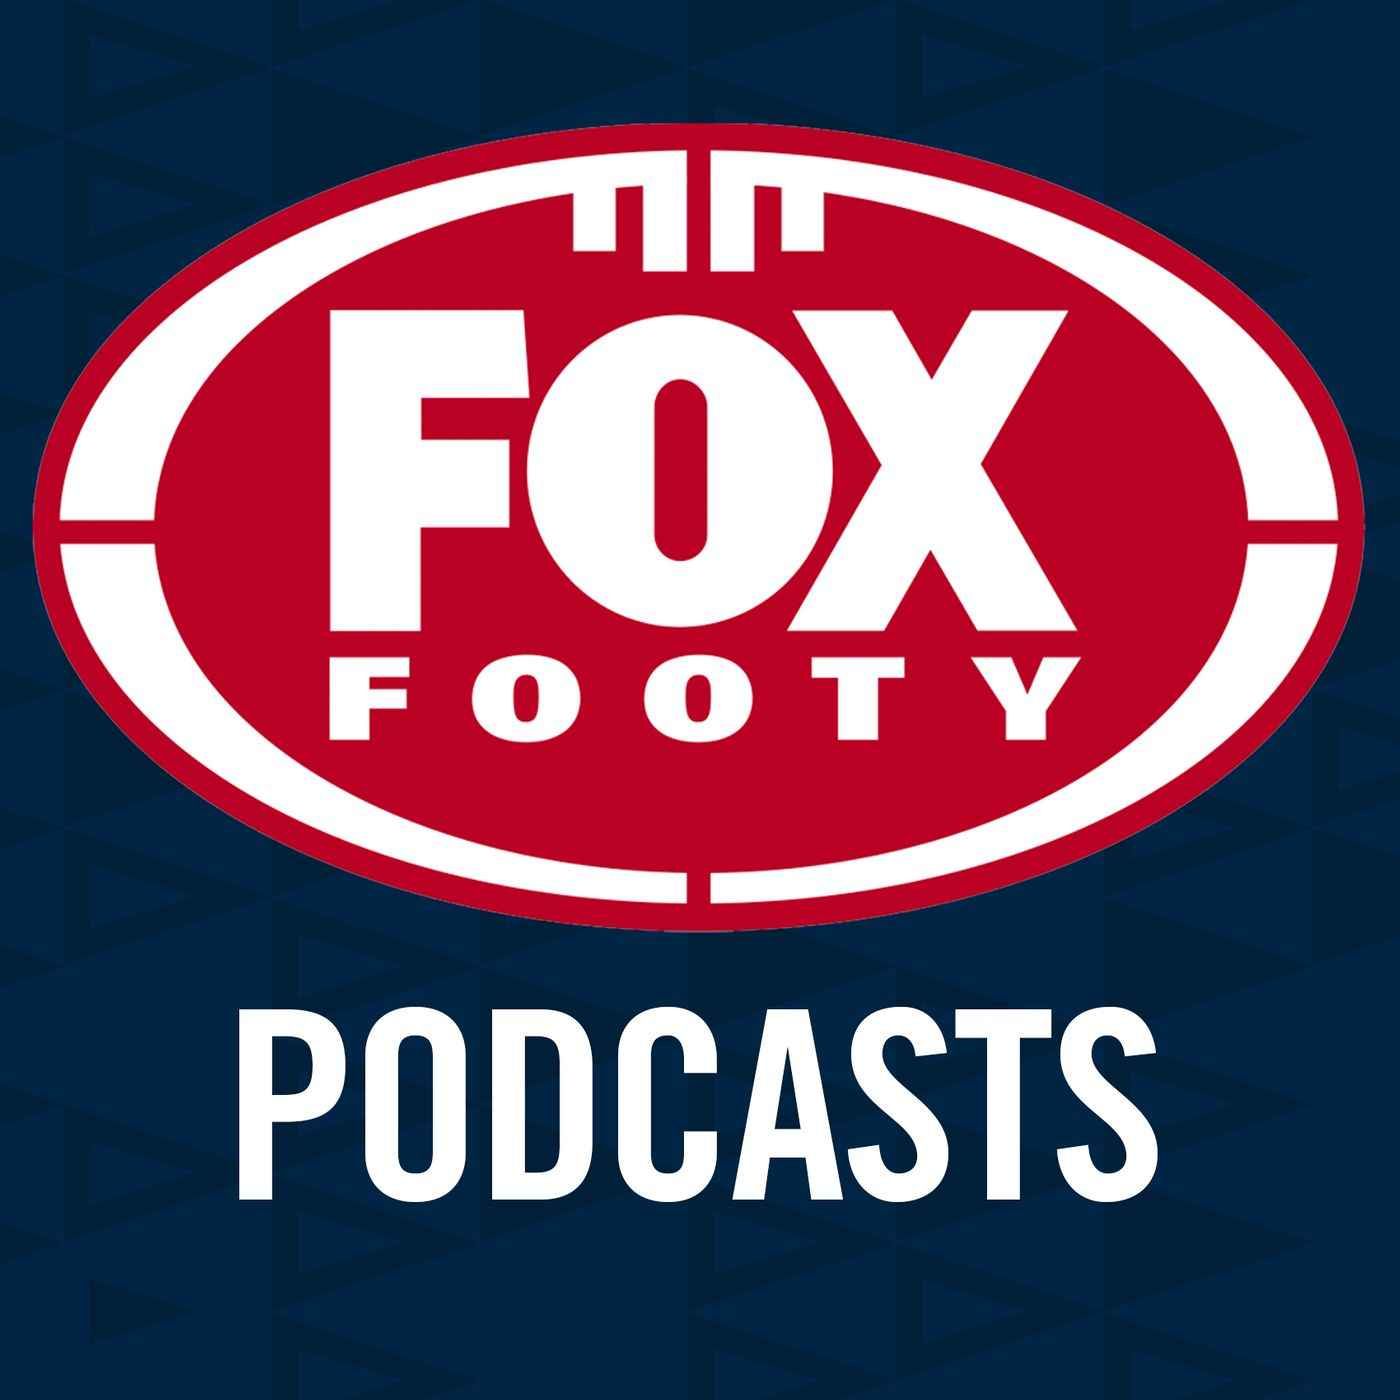 Fox Footy Podcast: The Brownlow, the Blues coach and the big dance